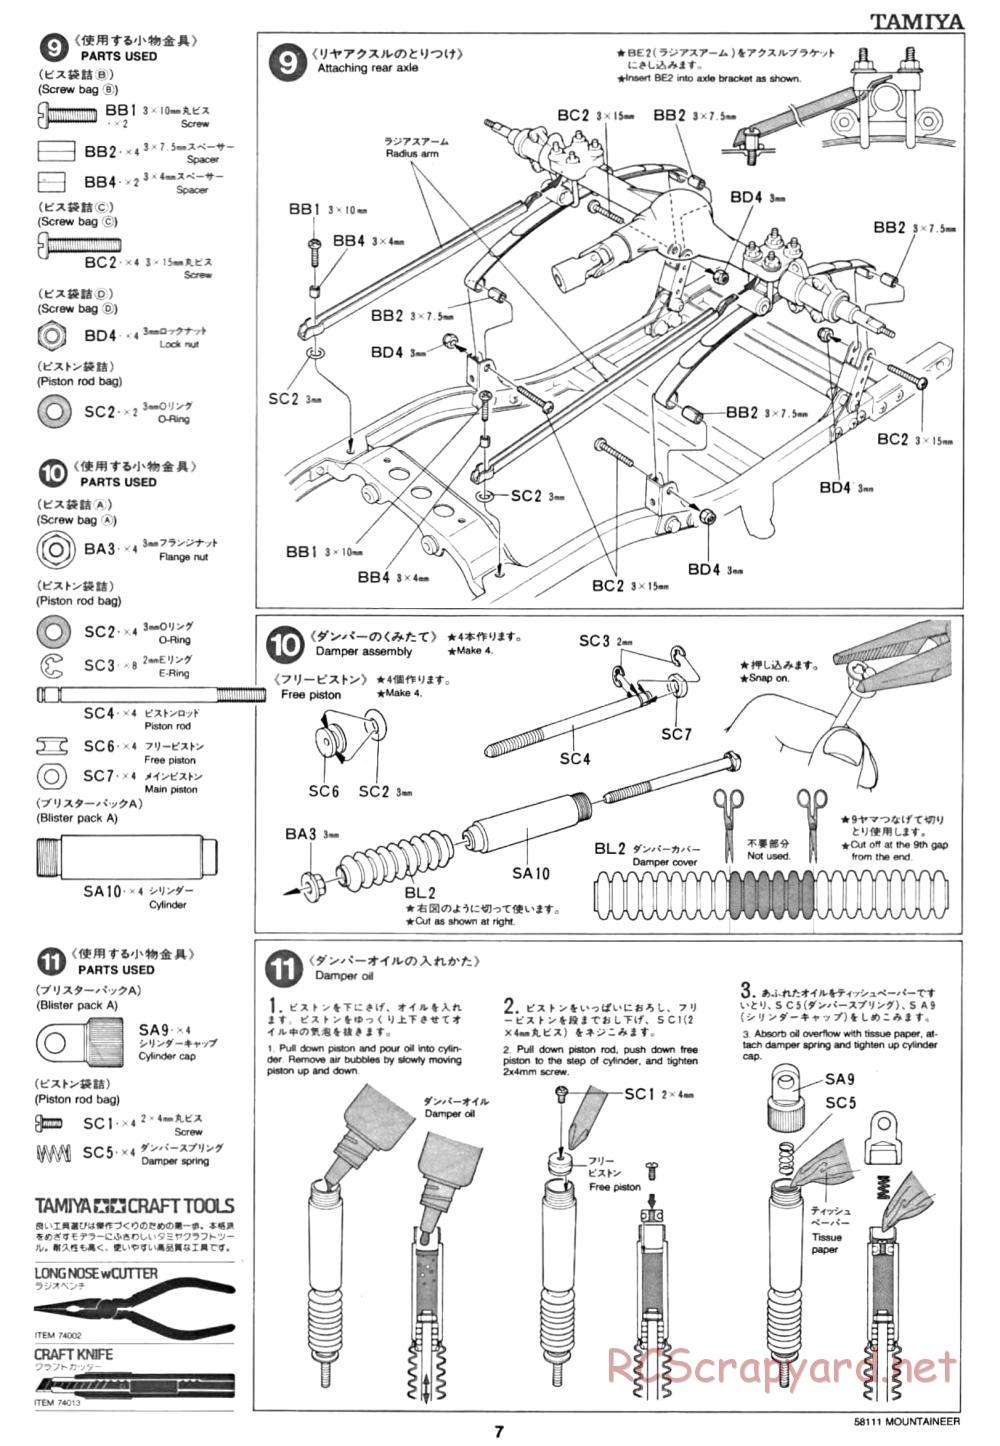 Tamiya - Toyota 4x4 Pick Up Mountaineer Chassis - Manual - Page 7